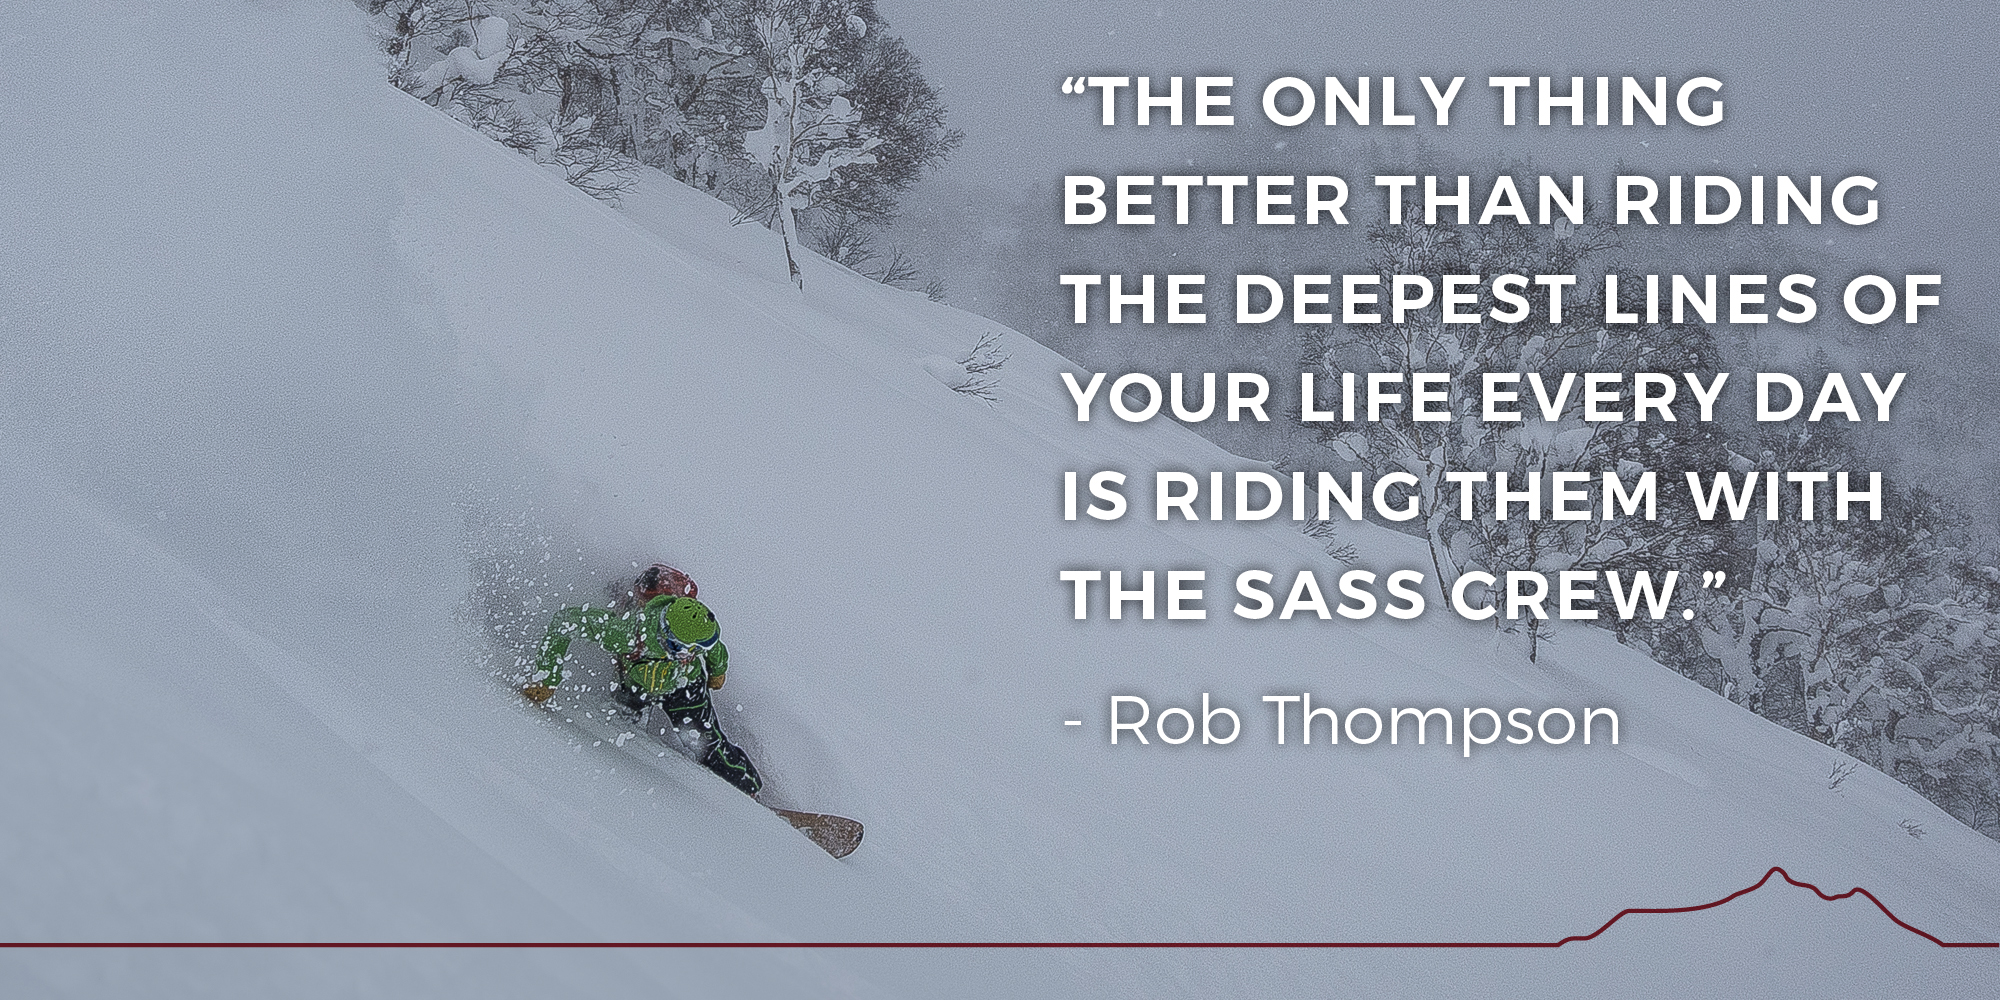 The only thing better than riding the deepest lines of your life every day is riding them with the SASS crew. -- Rob Thompson